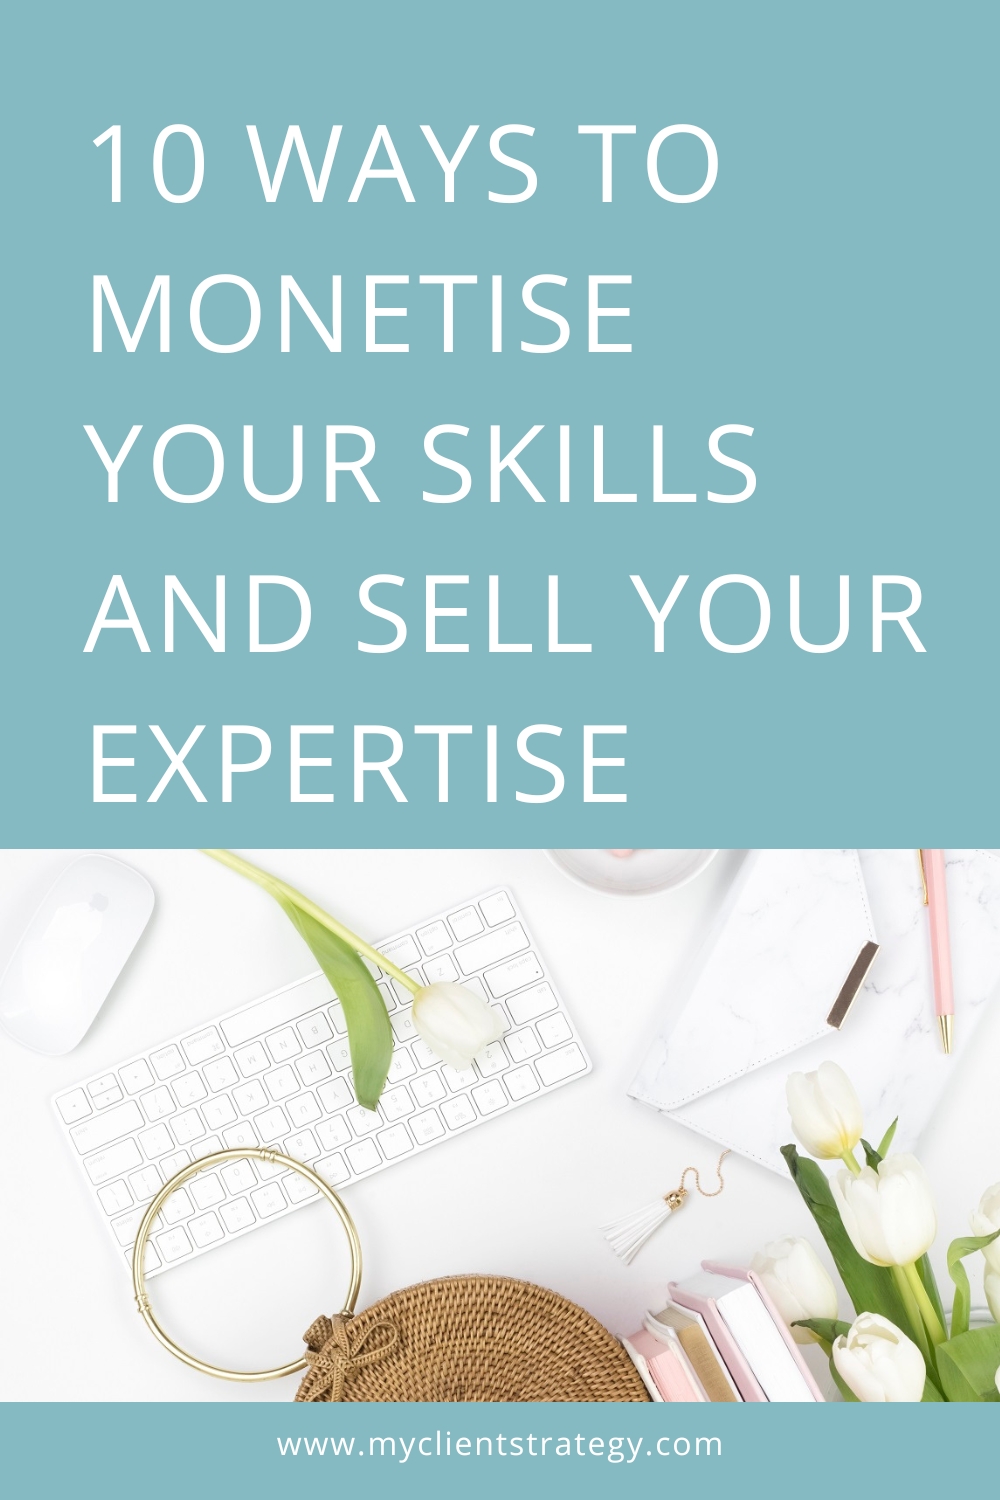 10 Ways to monetise your skills and sell your expertise